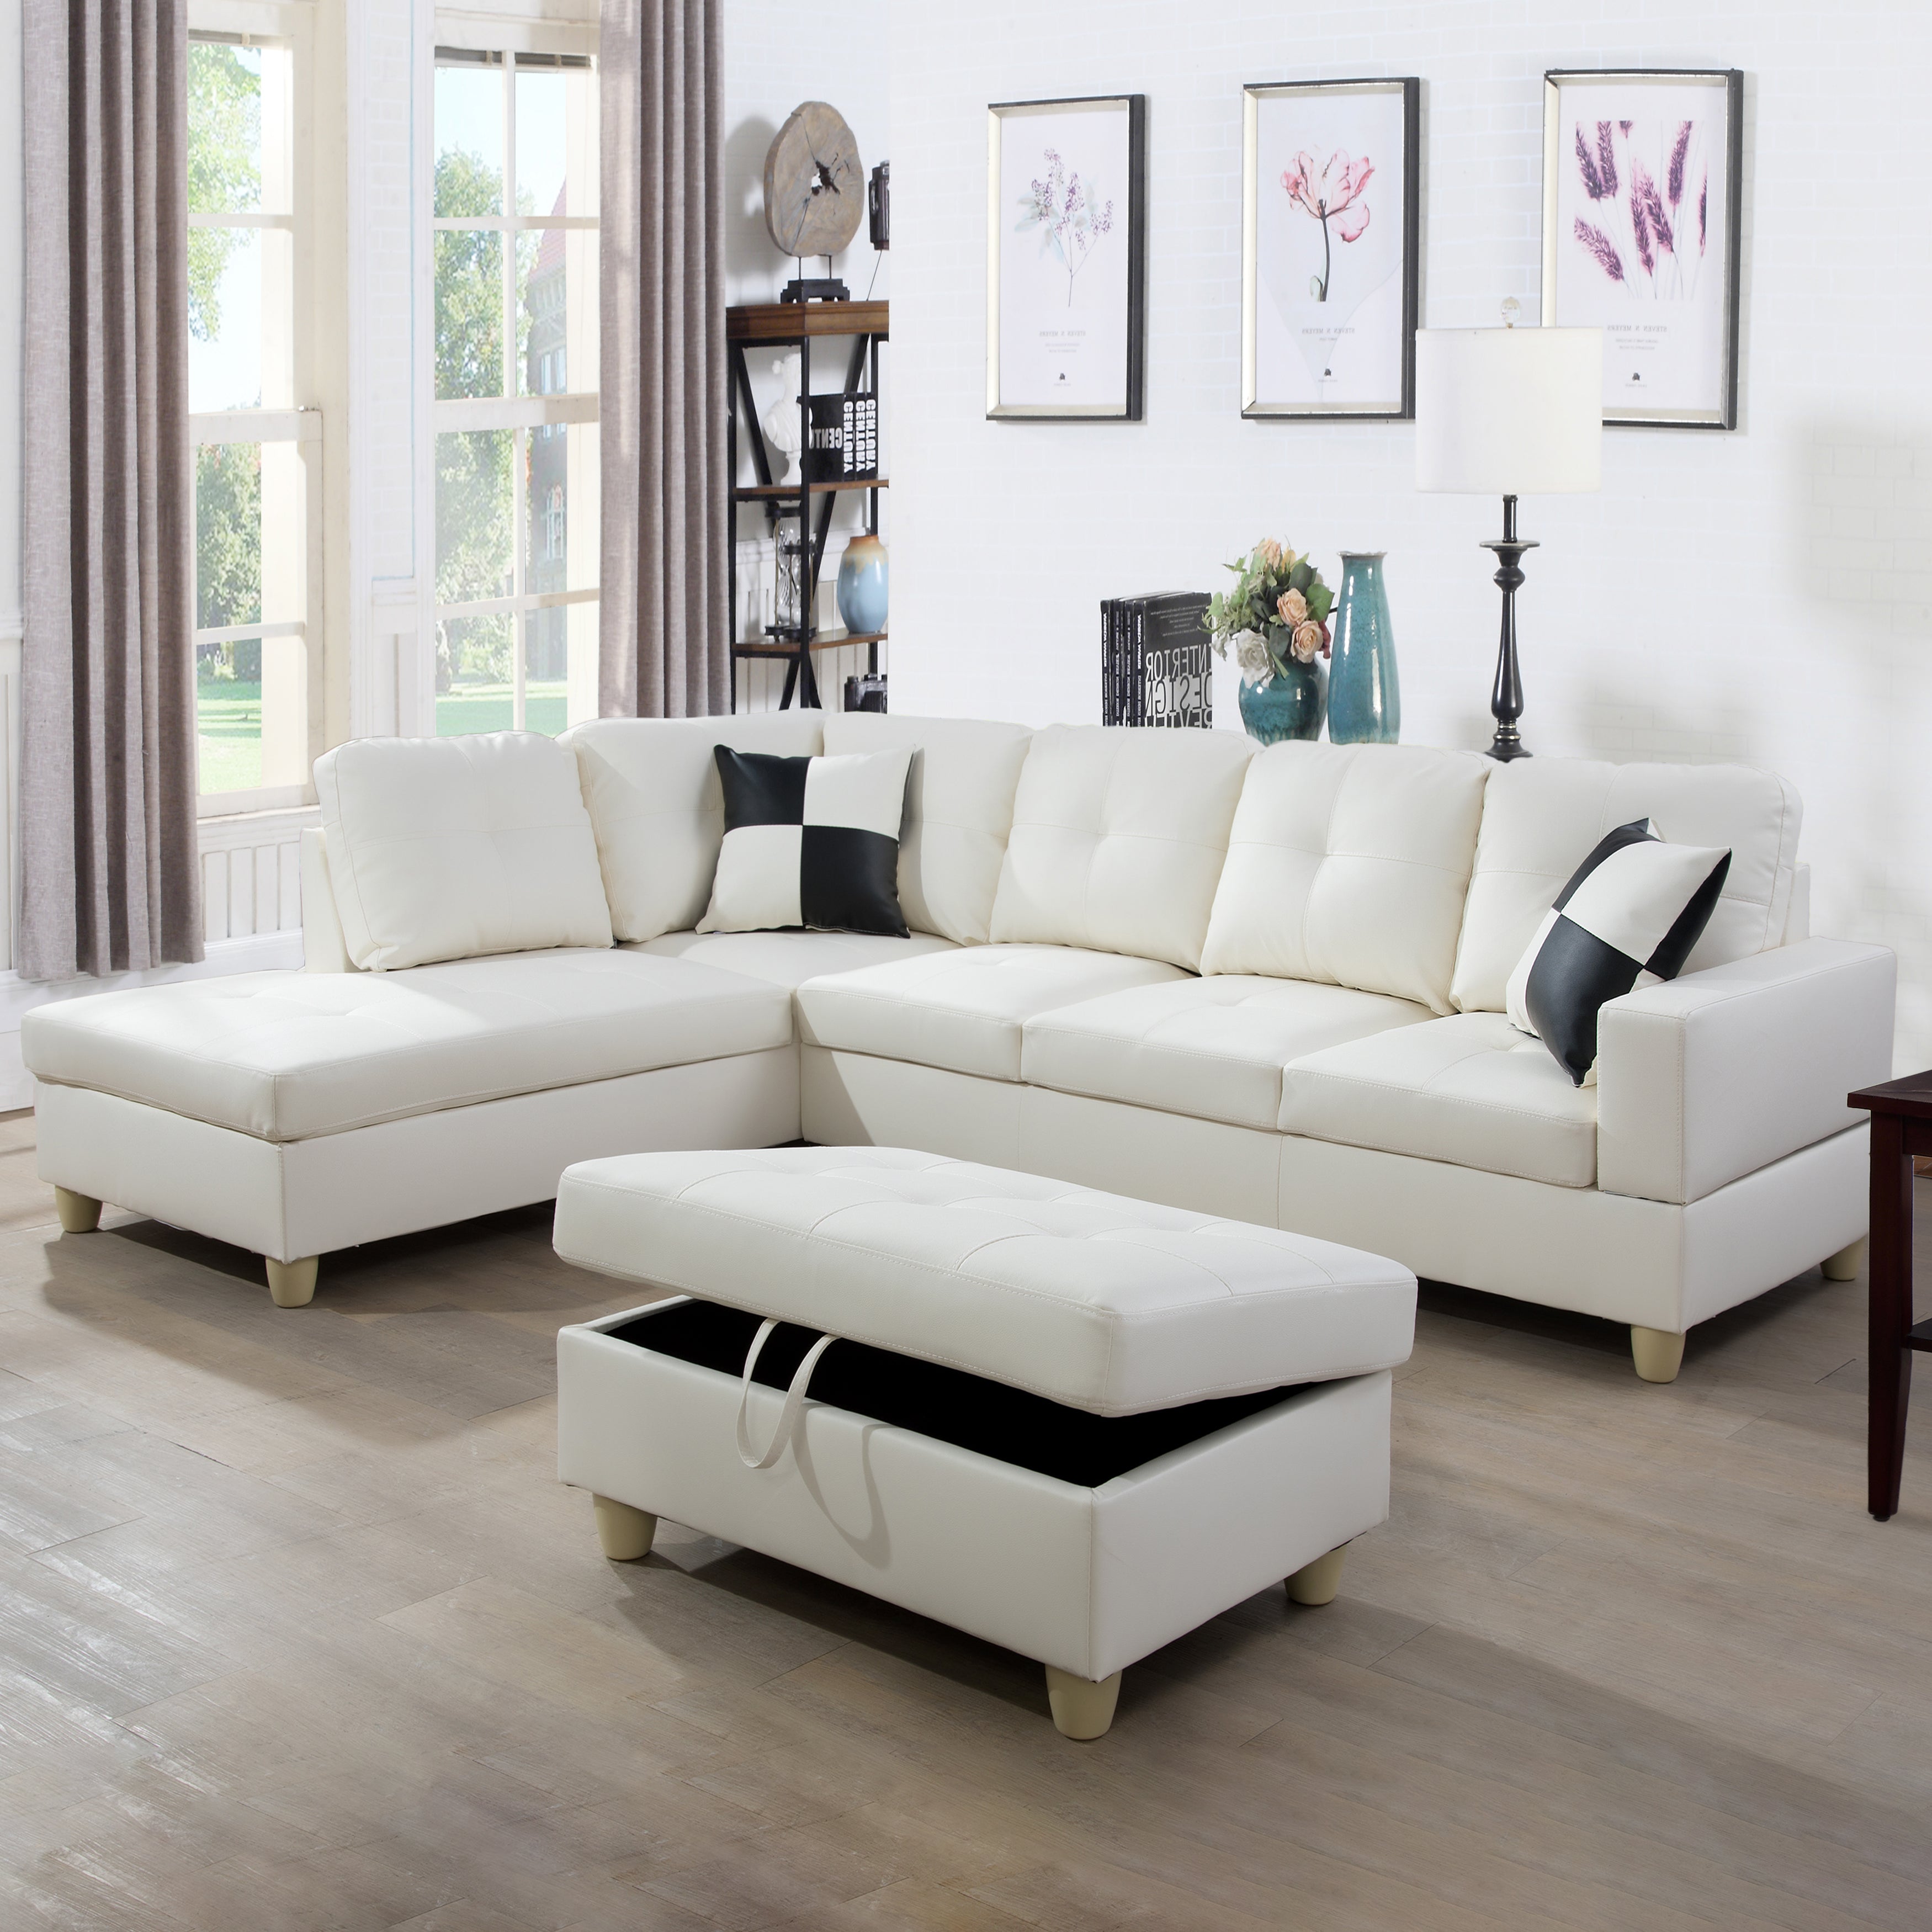 Ainehome White Faux Leather 3-Piece Couch Living Room Sofa Set